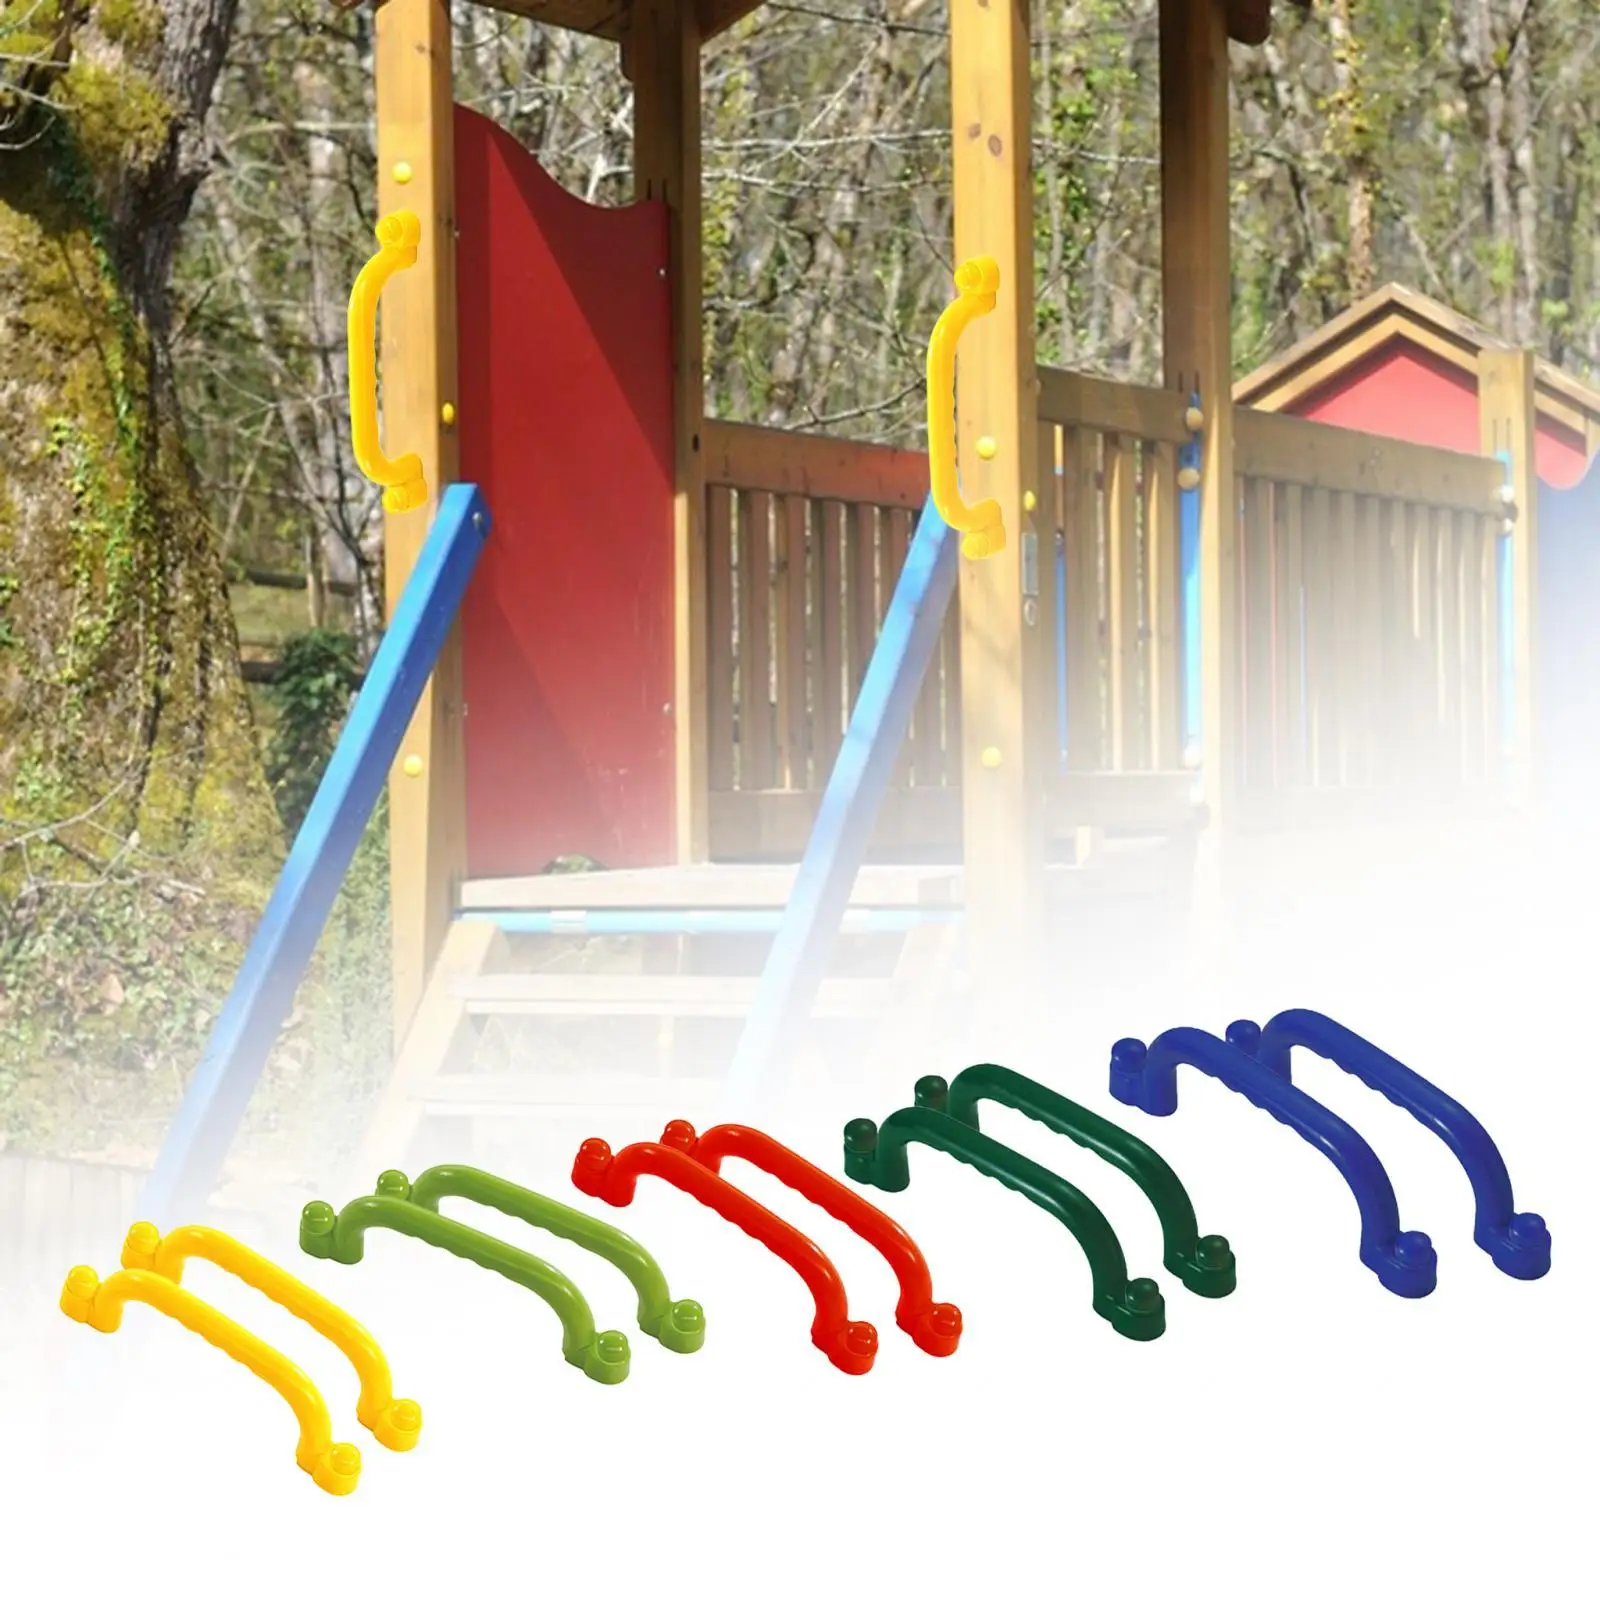 2x Playground Accessories Swingset Attachments Climb Playground Safety Handle for Park Treehouse Swingset Playhouse